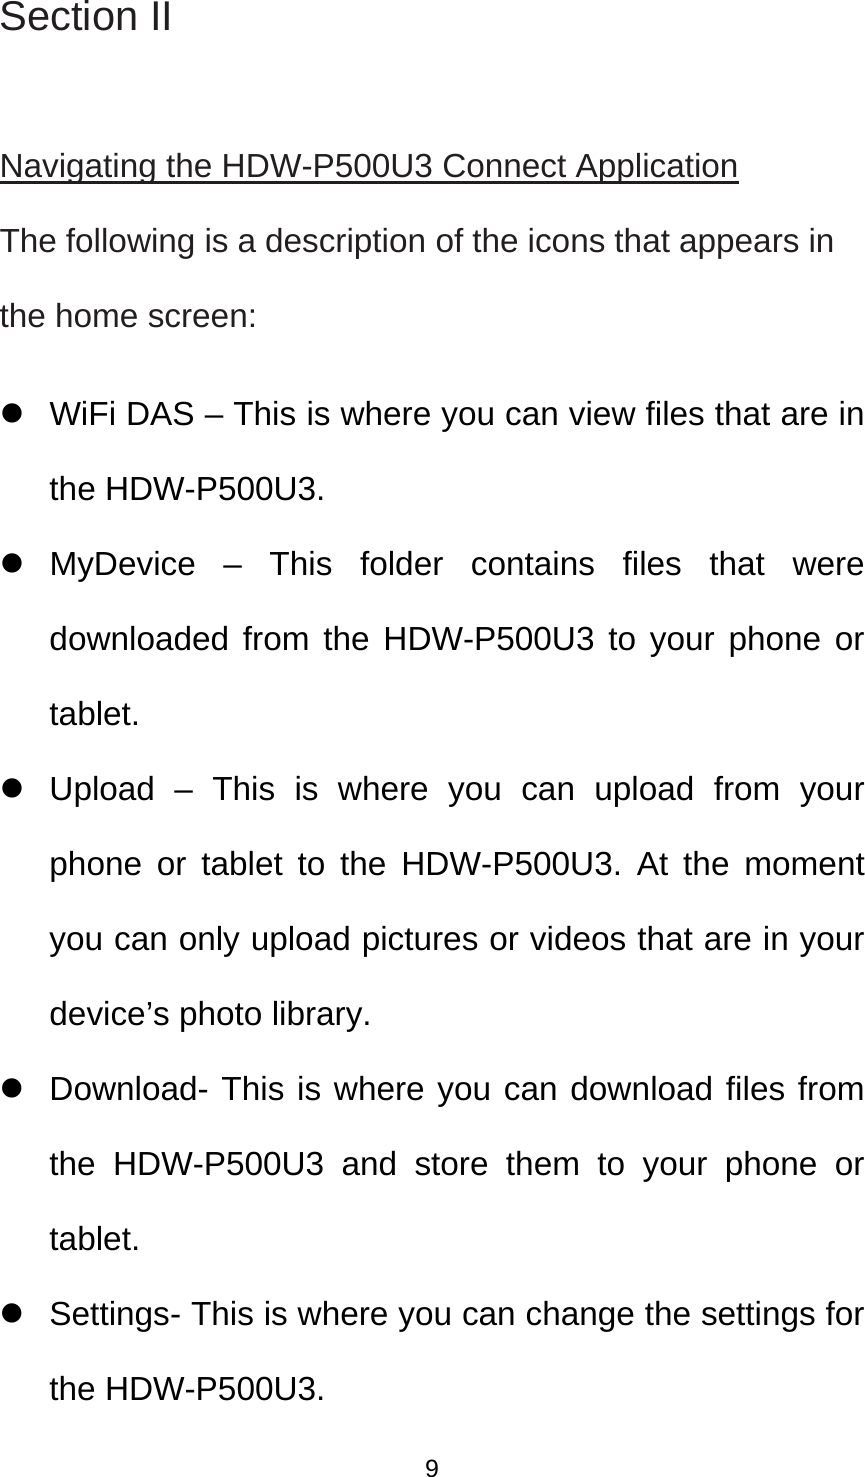 Section II  Navigating the HDW-P500U3 Connect Application The following is a description of the icons that appears in the home screen:     WiFi DAS – This is where you can view files that are in the HDW-P500U3.    MyDevice – This folder contains files that were downloaded from the HDW-P500U3 to your phone or tablet.   Upload – This is where you can upload from your phone or tablet to the HDW-P500U3. At the moment you can only upload pictures or videos that are in your device’s photo library.     Download- This is where you can download files from the HDW-P500U3 and store them to your phone or tablet.    Settings- This is where you can change the settings for the HDW-P500U3.  9